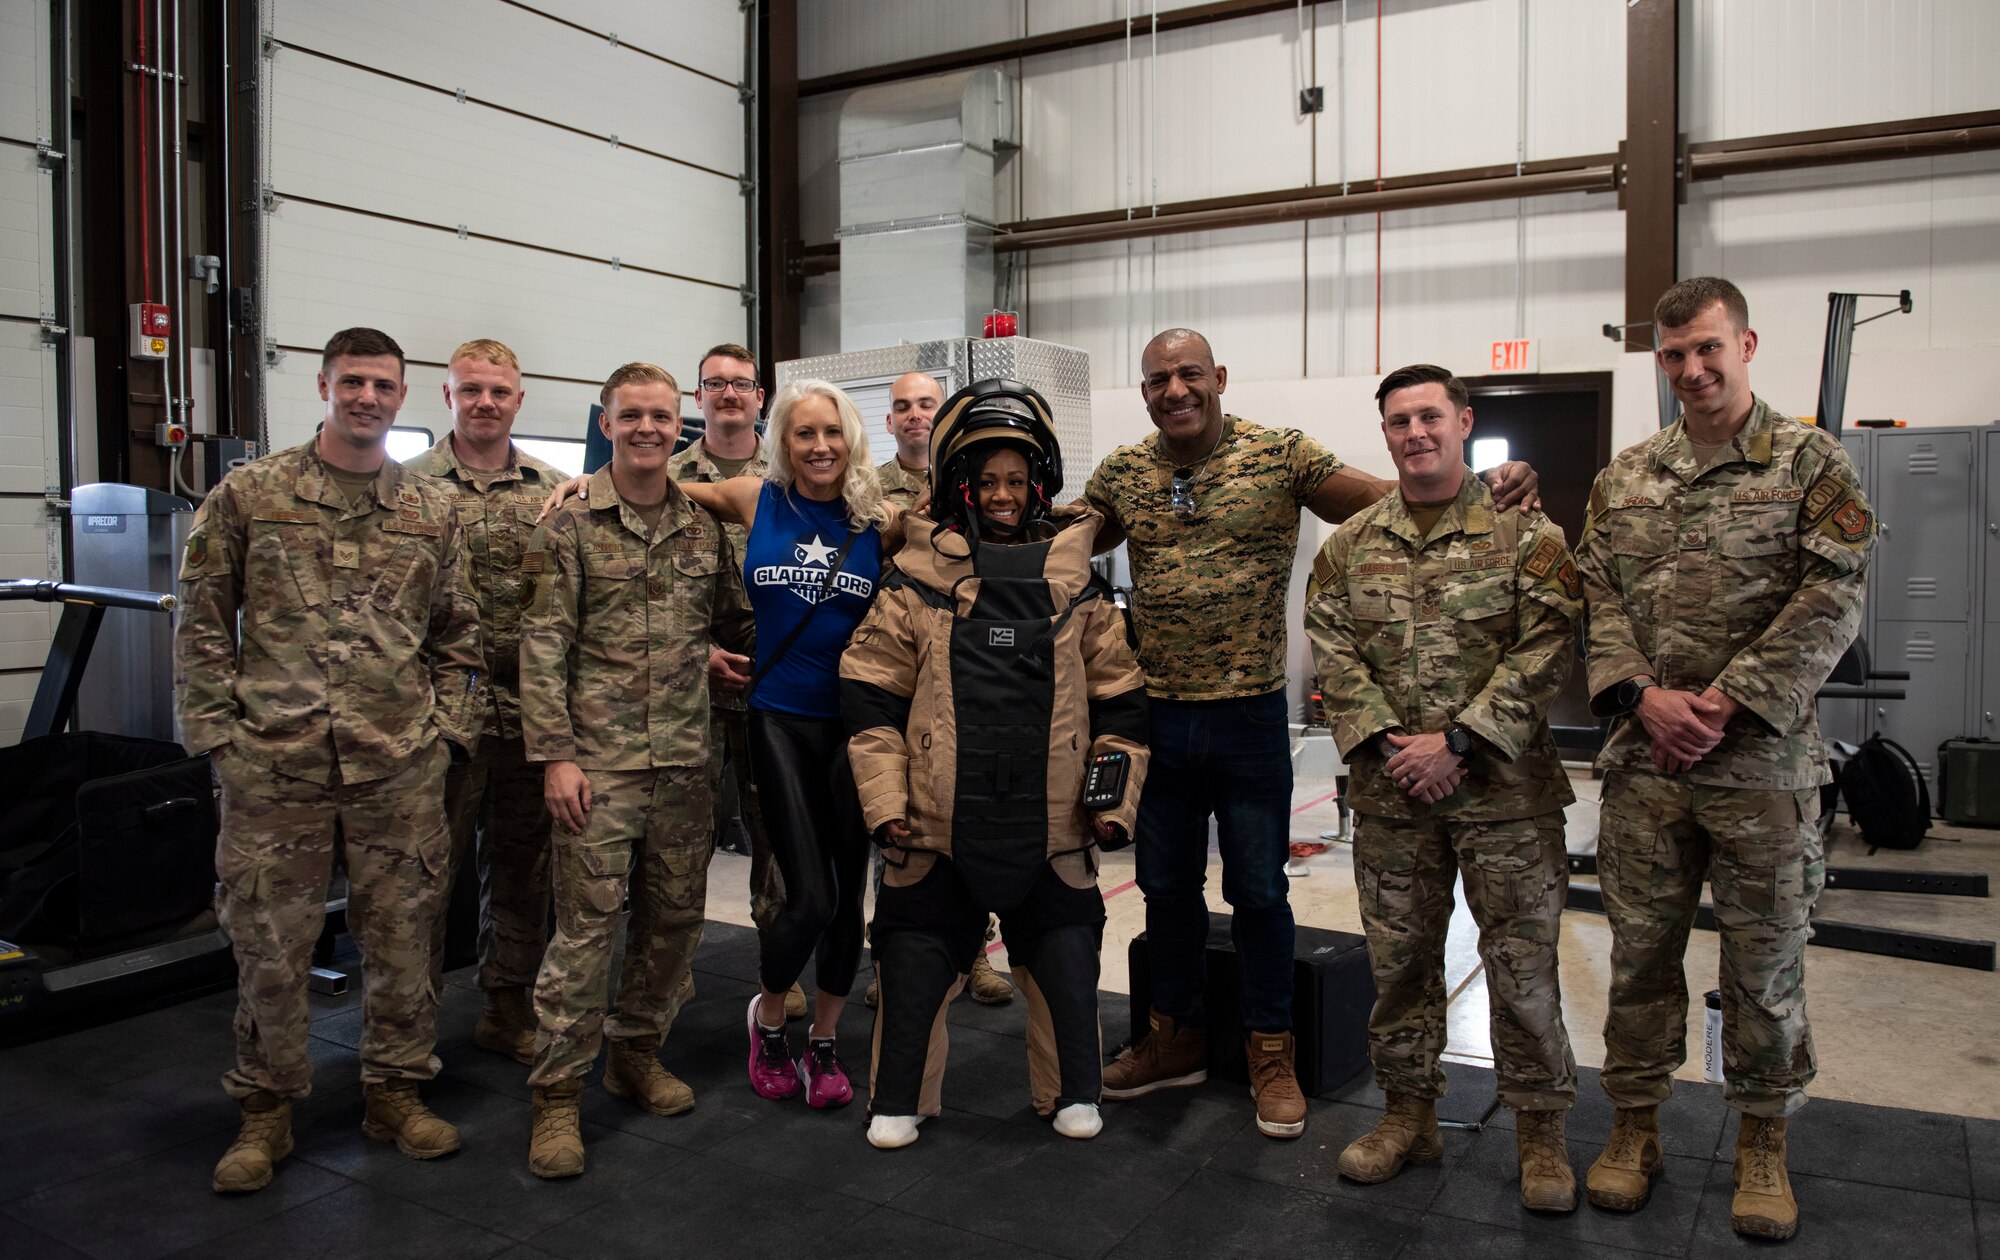 Airmen from the 39th Air Base Wing Civil Engineer Squadron pose for a photo with members of the athletic competition television show, “American Gladiators,” at Incirlik Air Base, Turkey, April 27, 2022. Cast members of “American Gladiators” visited Incirlik AB to show support of base members serving in overseas locations and thank 39 ABW Airmen for their unwavering dedication to defending NATO’s southern flank. (U.S. Air Force photo by Staff Sgt. Gabrielle Winn)